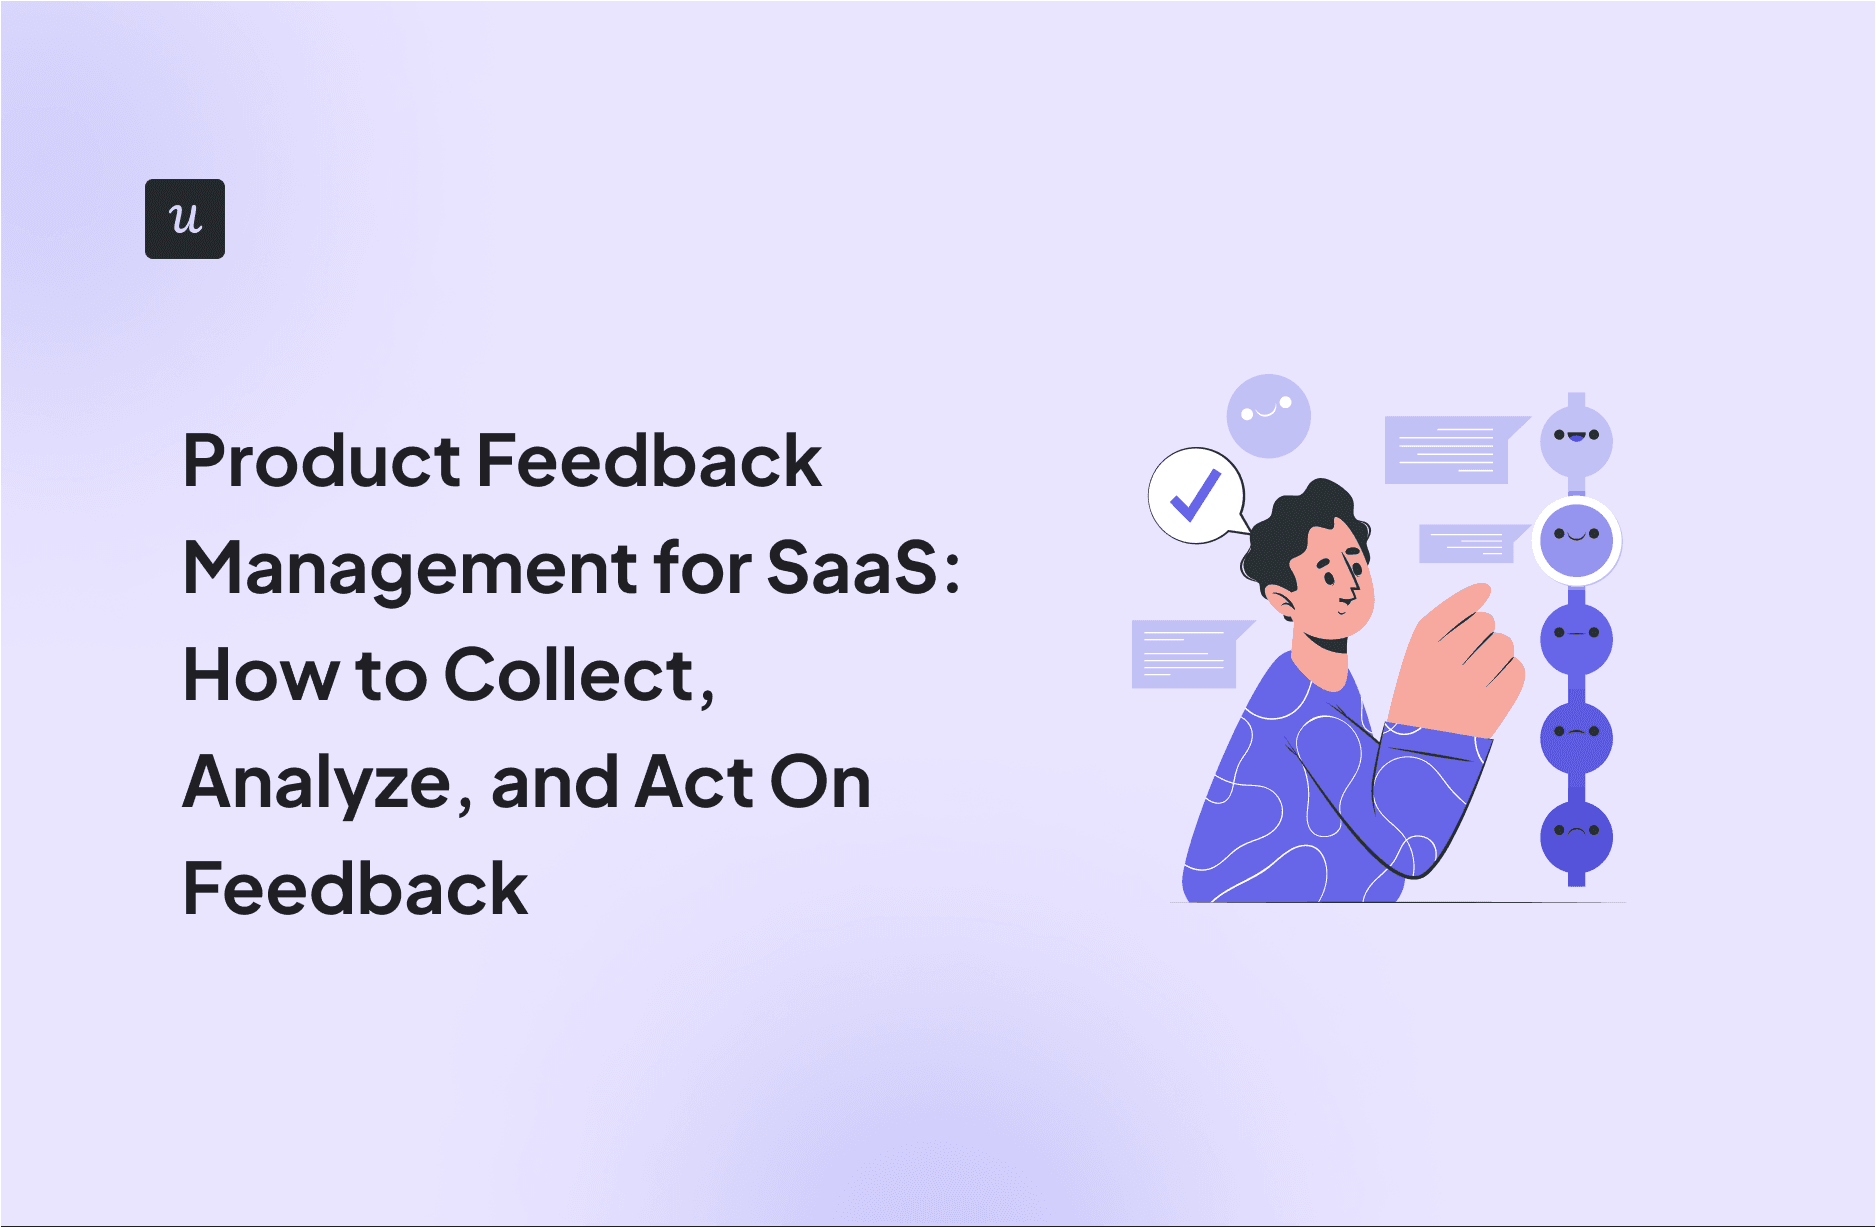 Product Feedback Management for SaaS: How to Collect, Analyze, and Act On Feedback cover